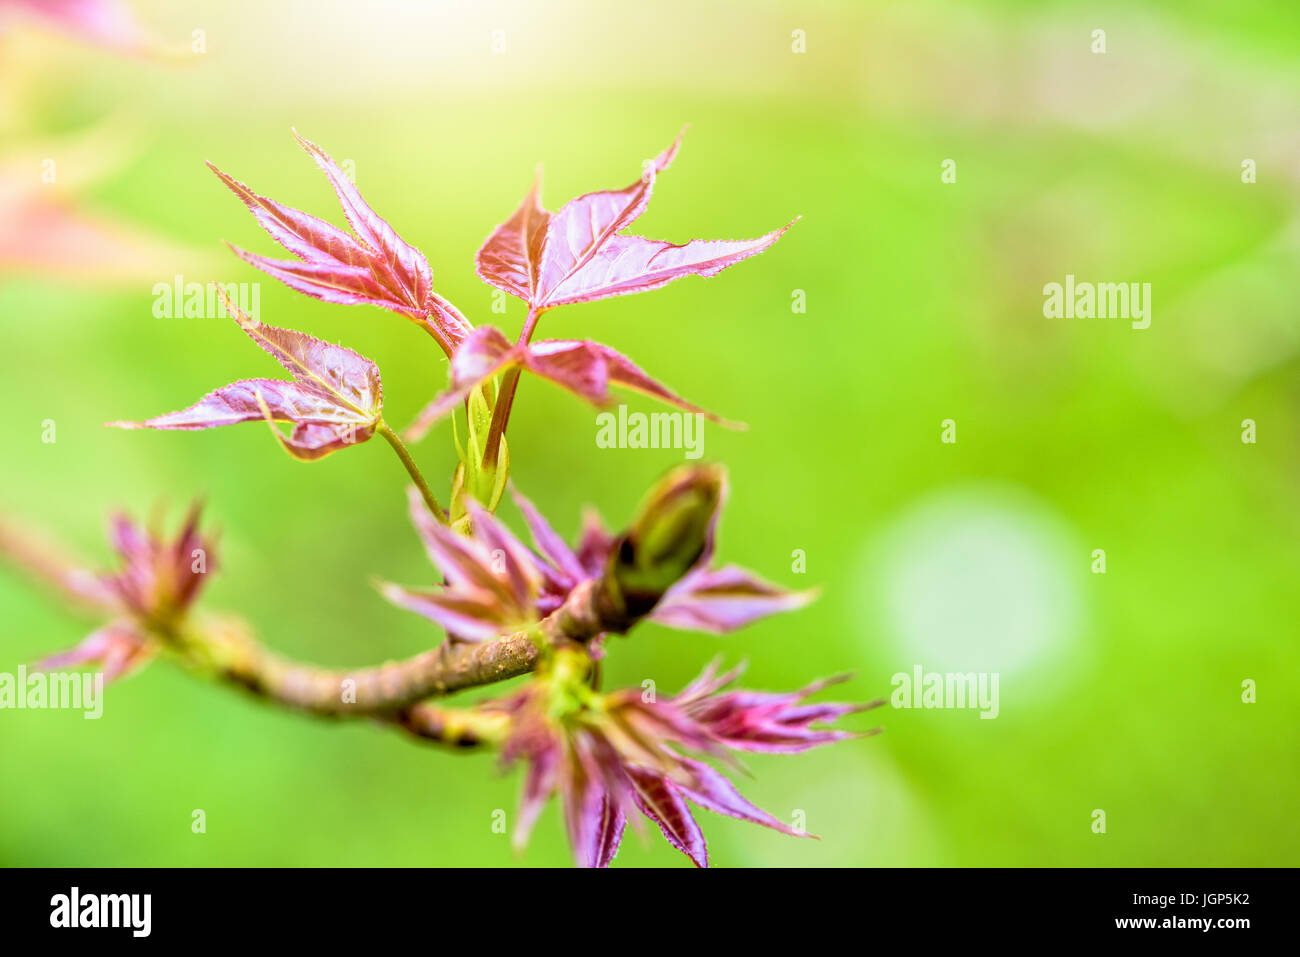 Red young leaves of Maple, Liquidambar formosana, Chinese sweet gum or Formosan gum with sunlight are blossoming in spring on green background Stock Photo